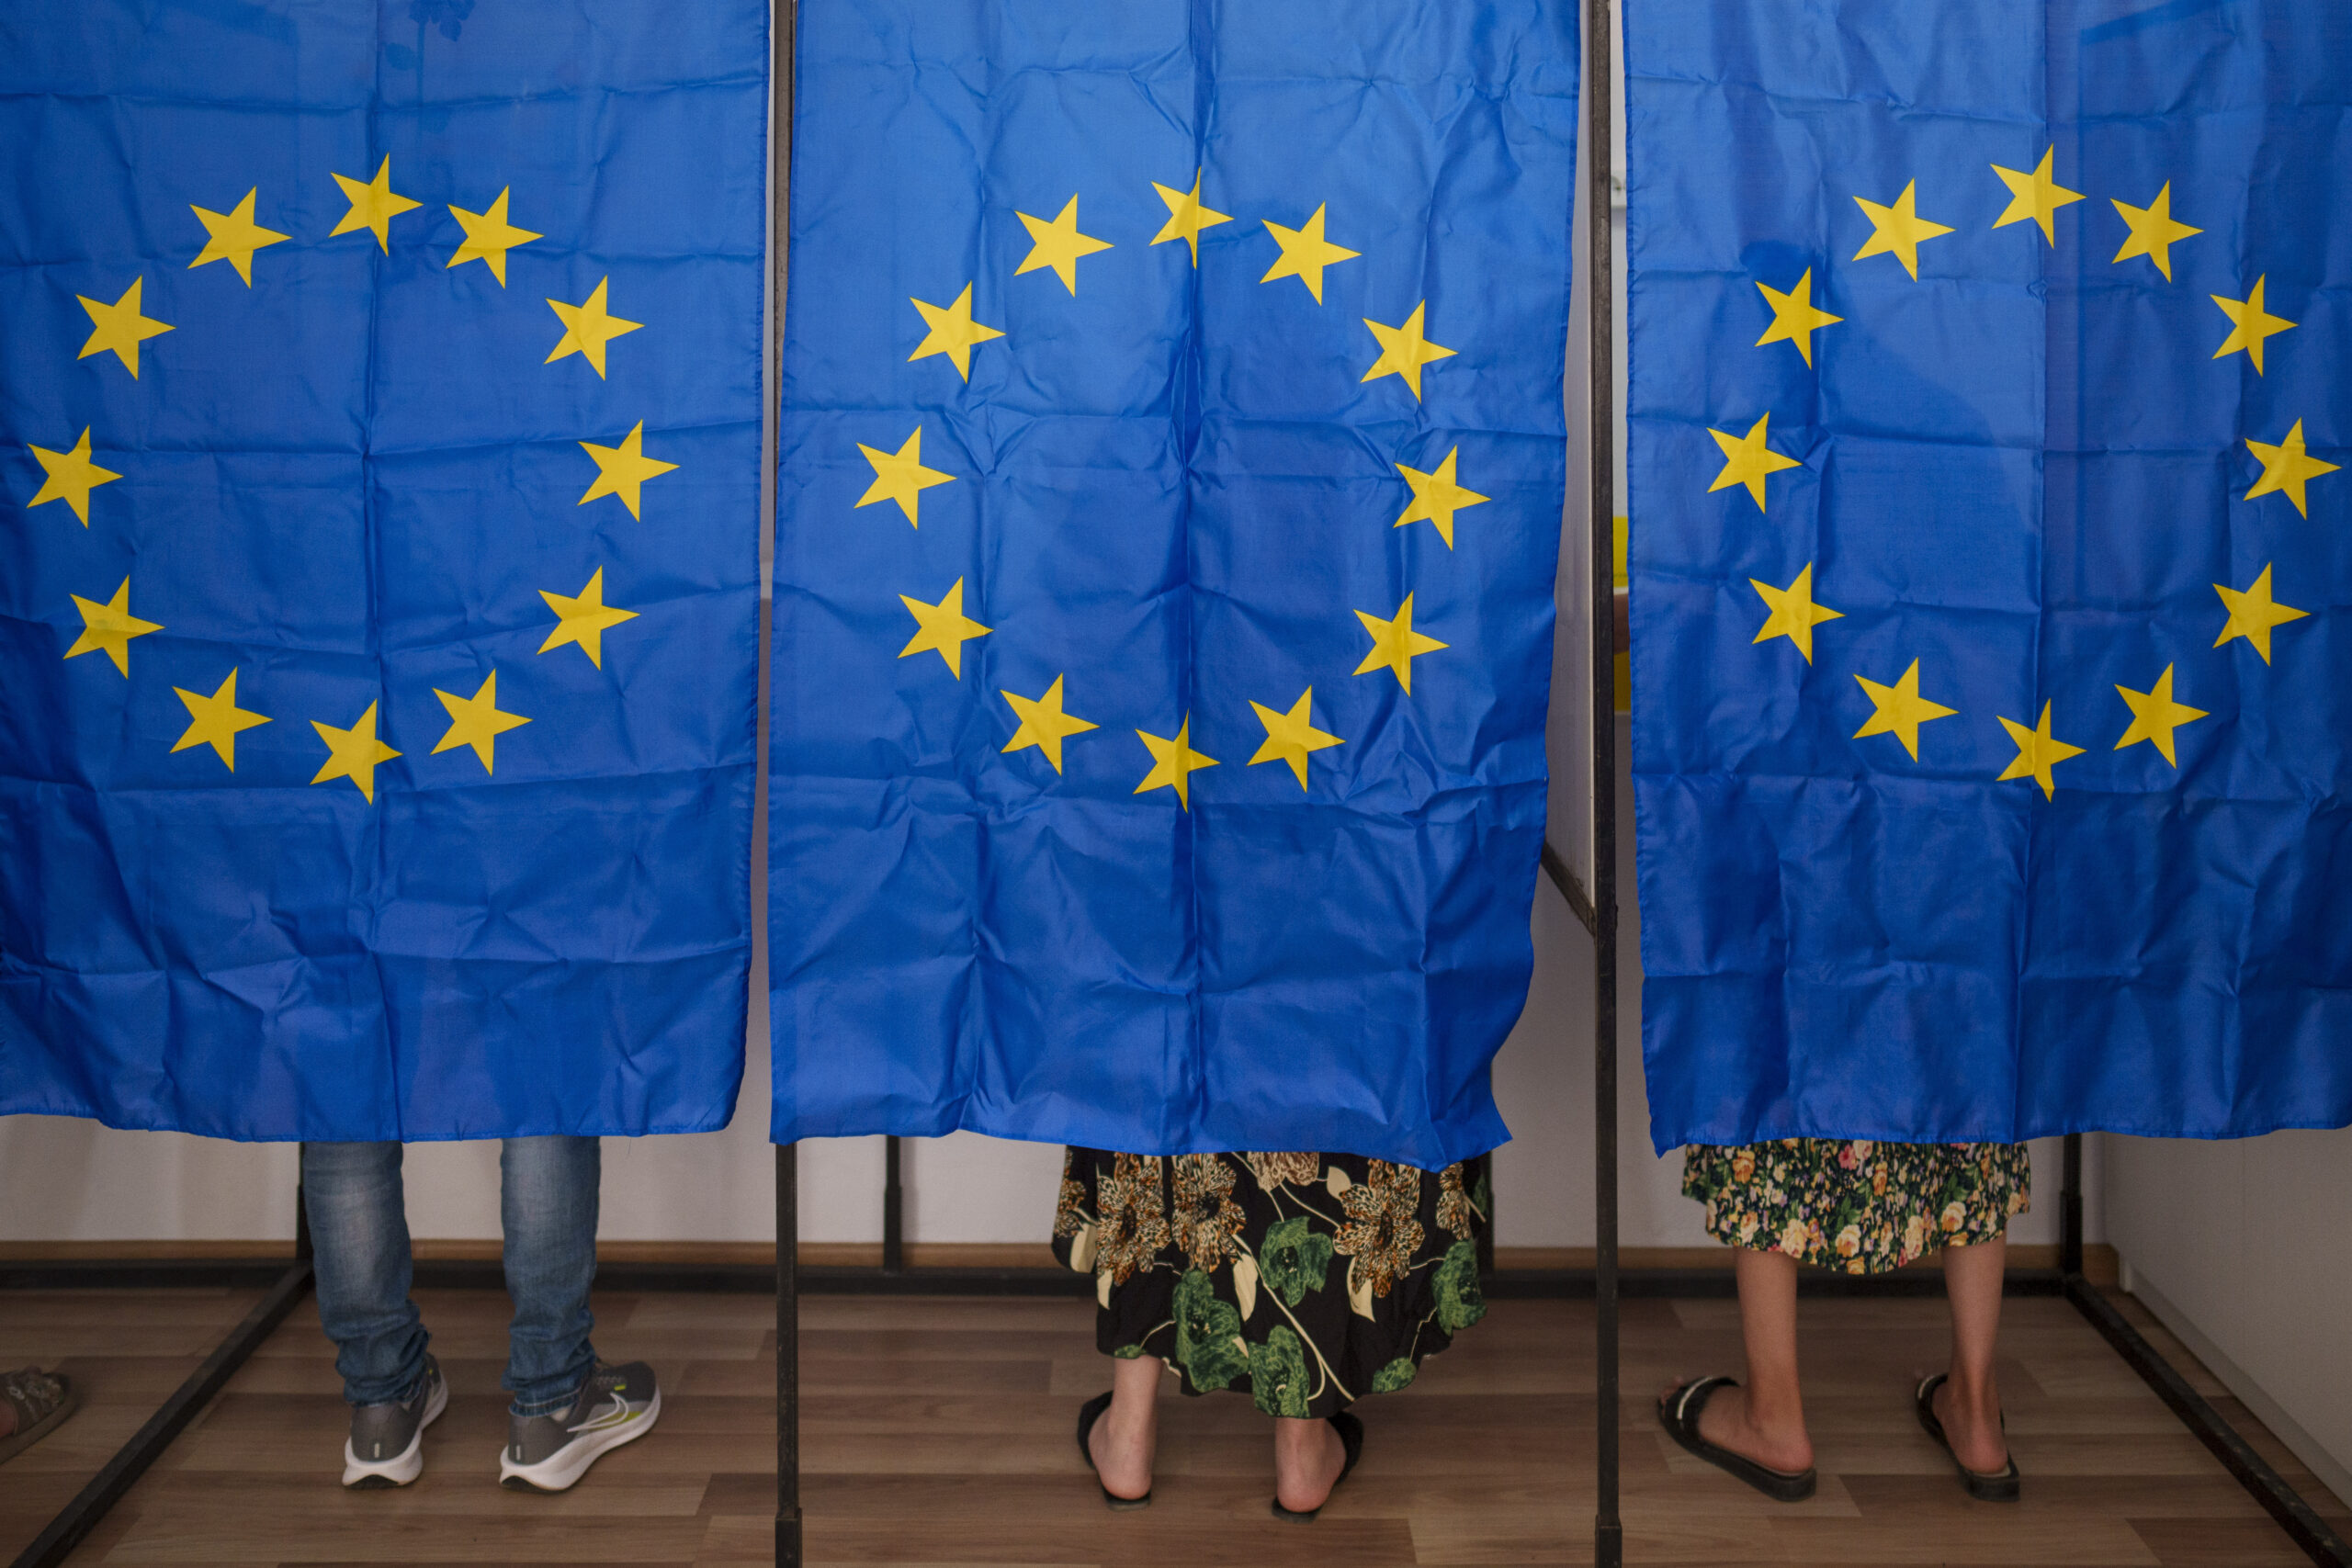 Election shifts the European Parliament further right